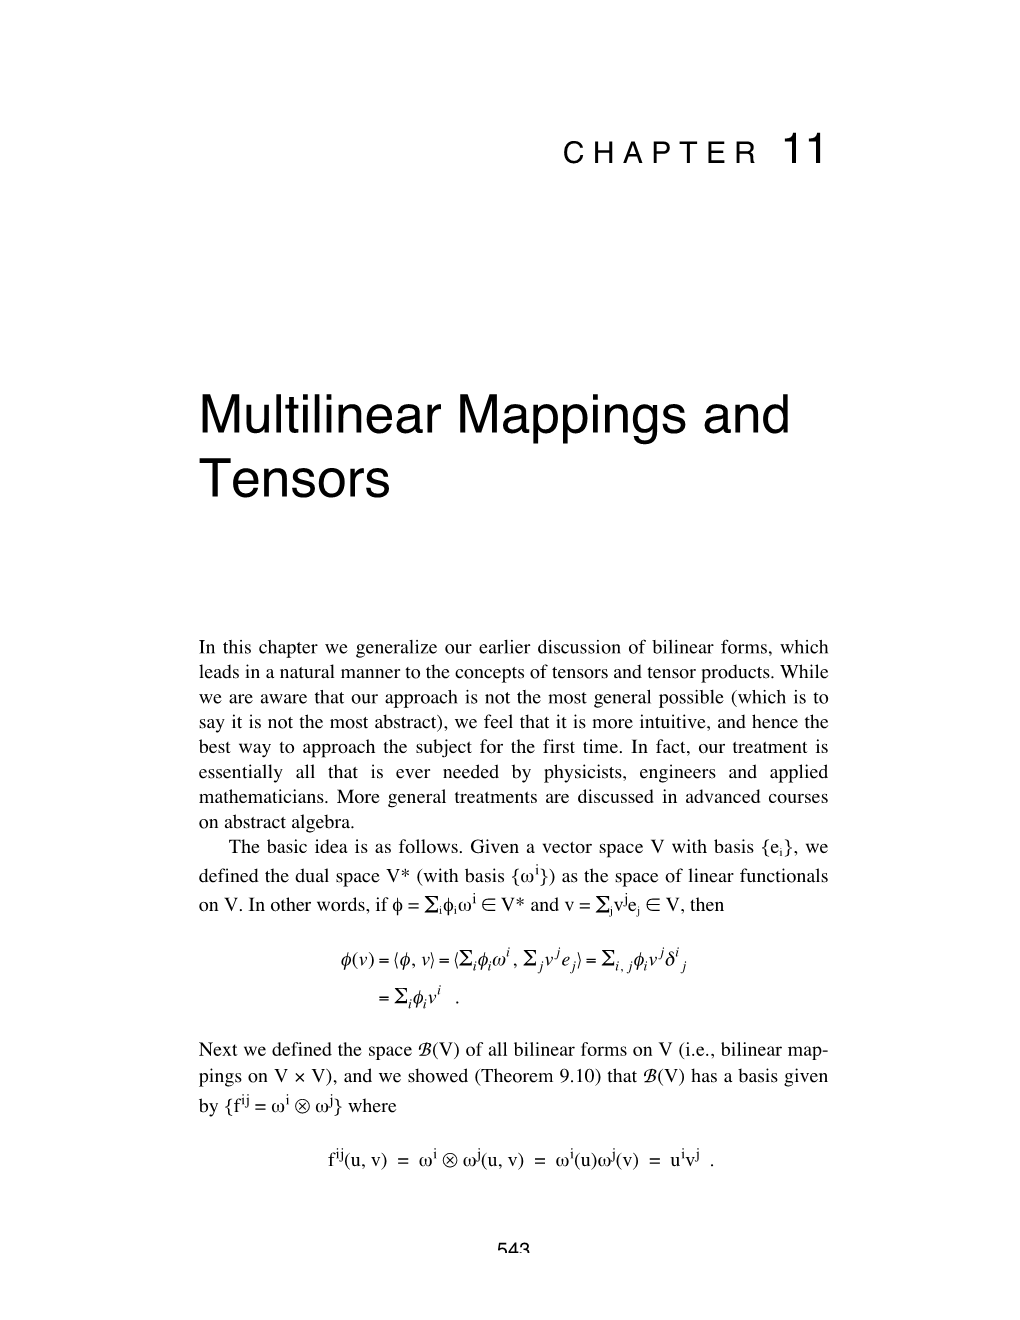 Multilinear Mappings and Tensors